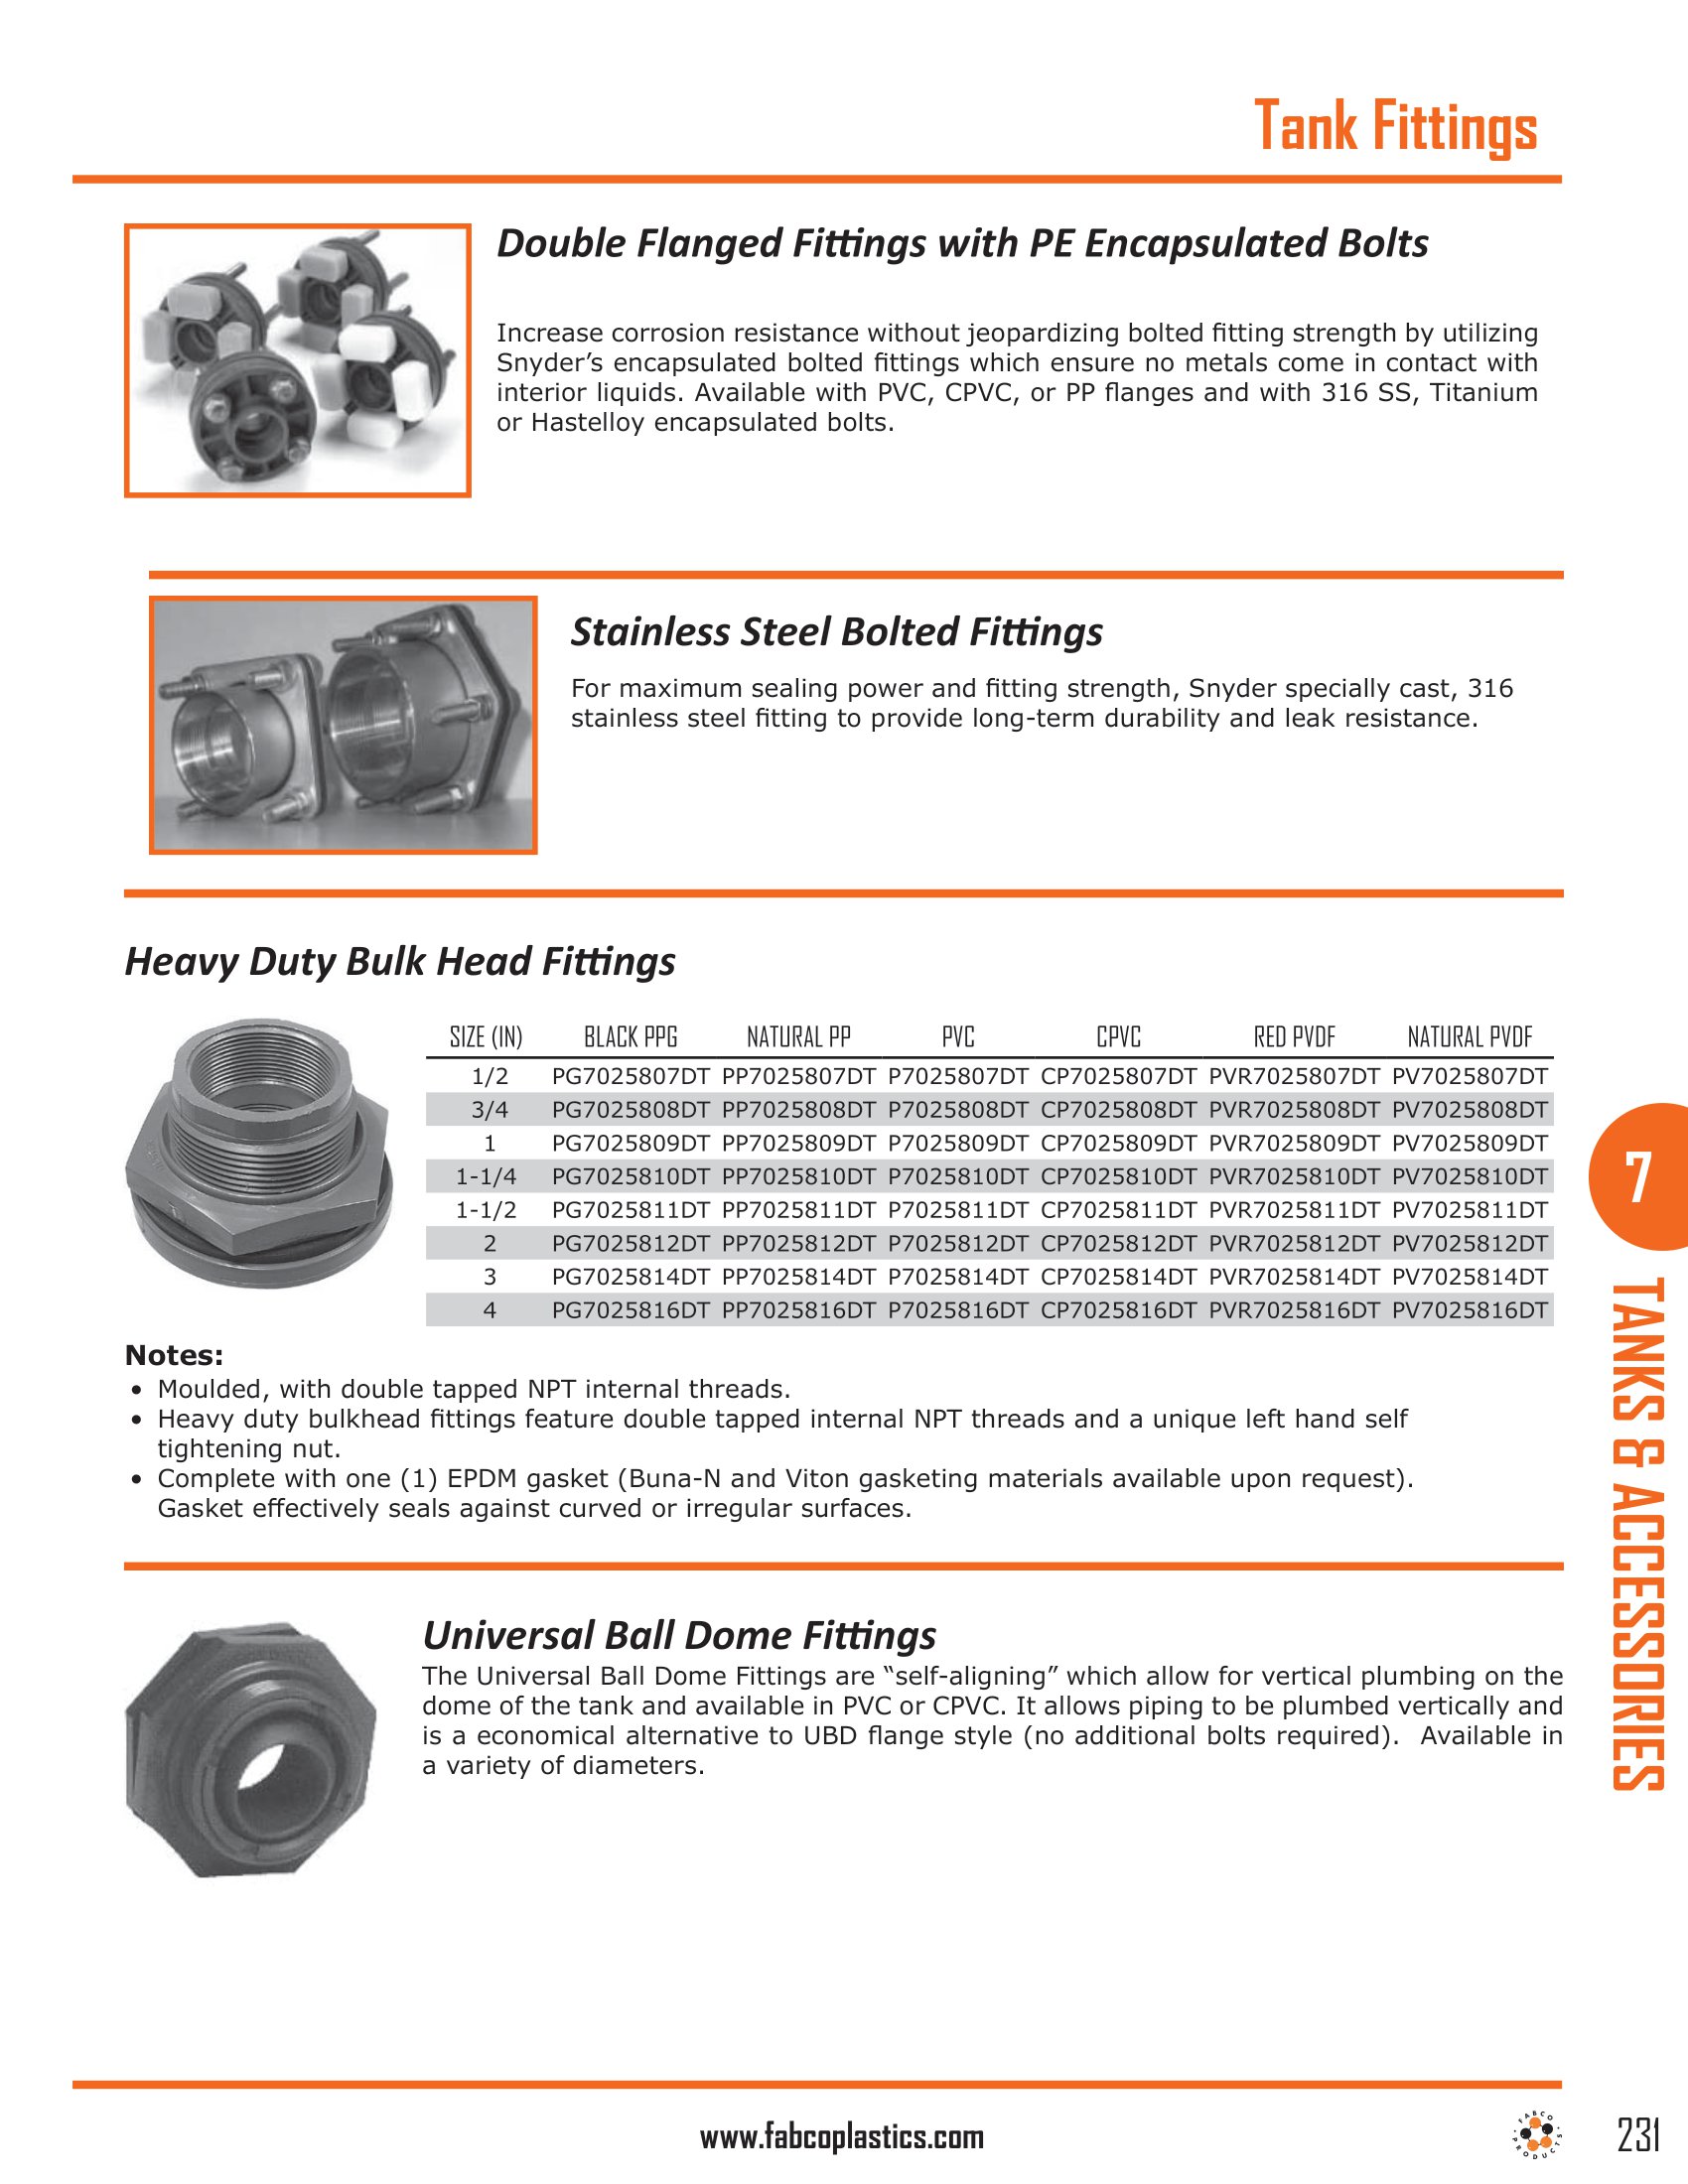 Tank Fittings And Accessories